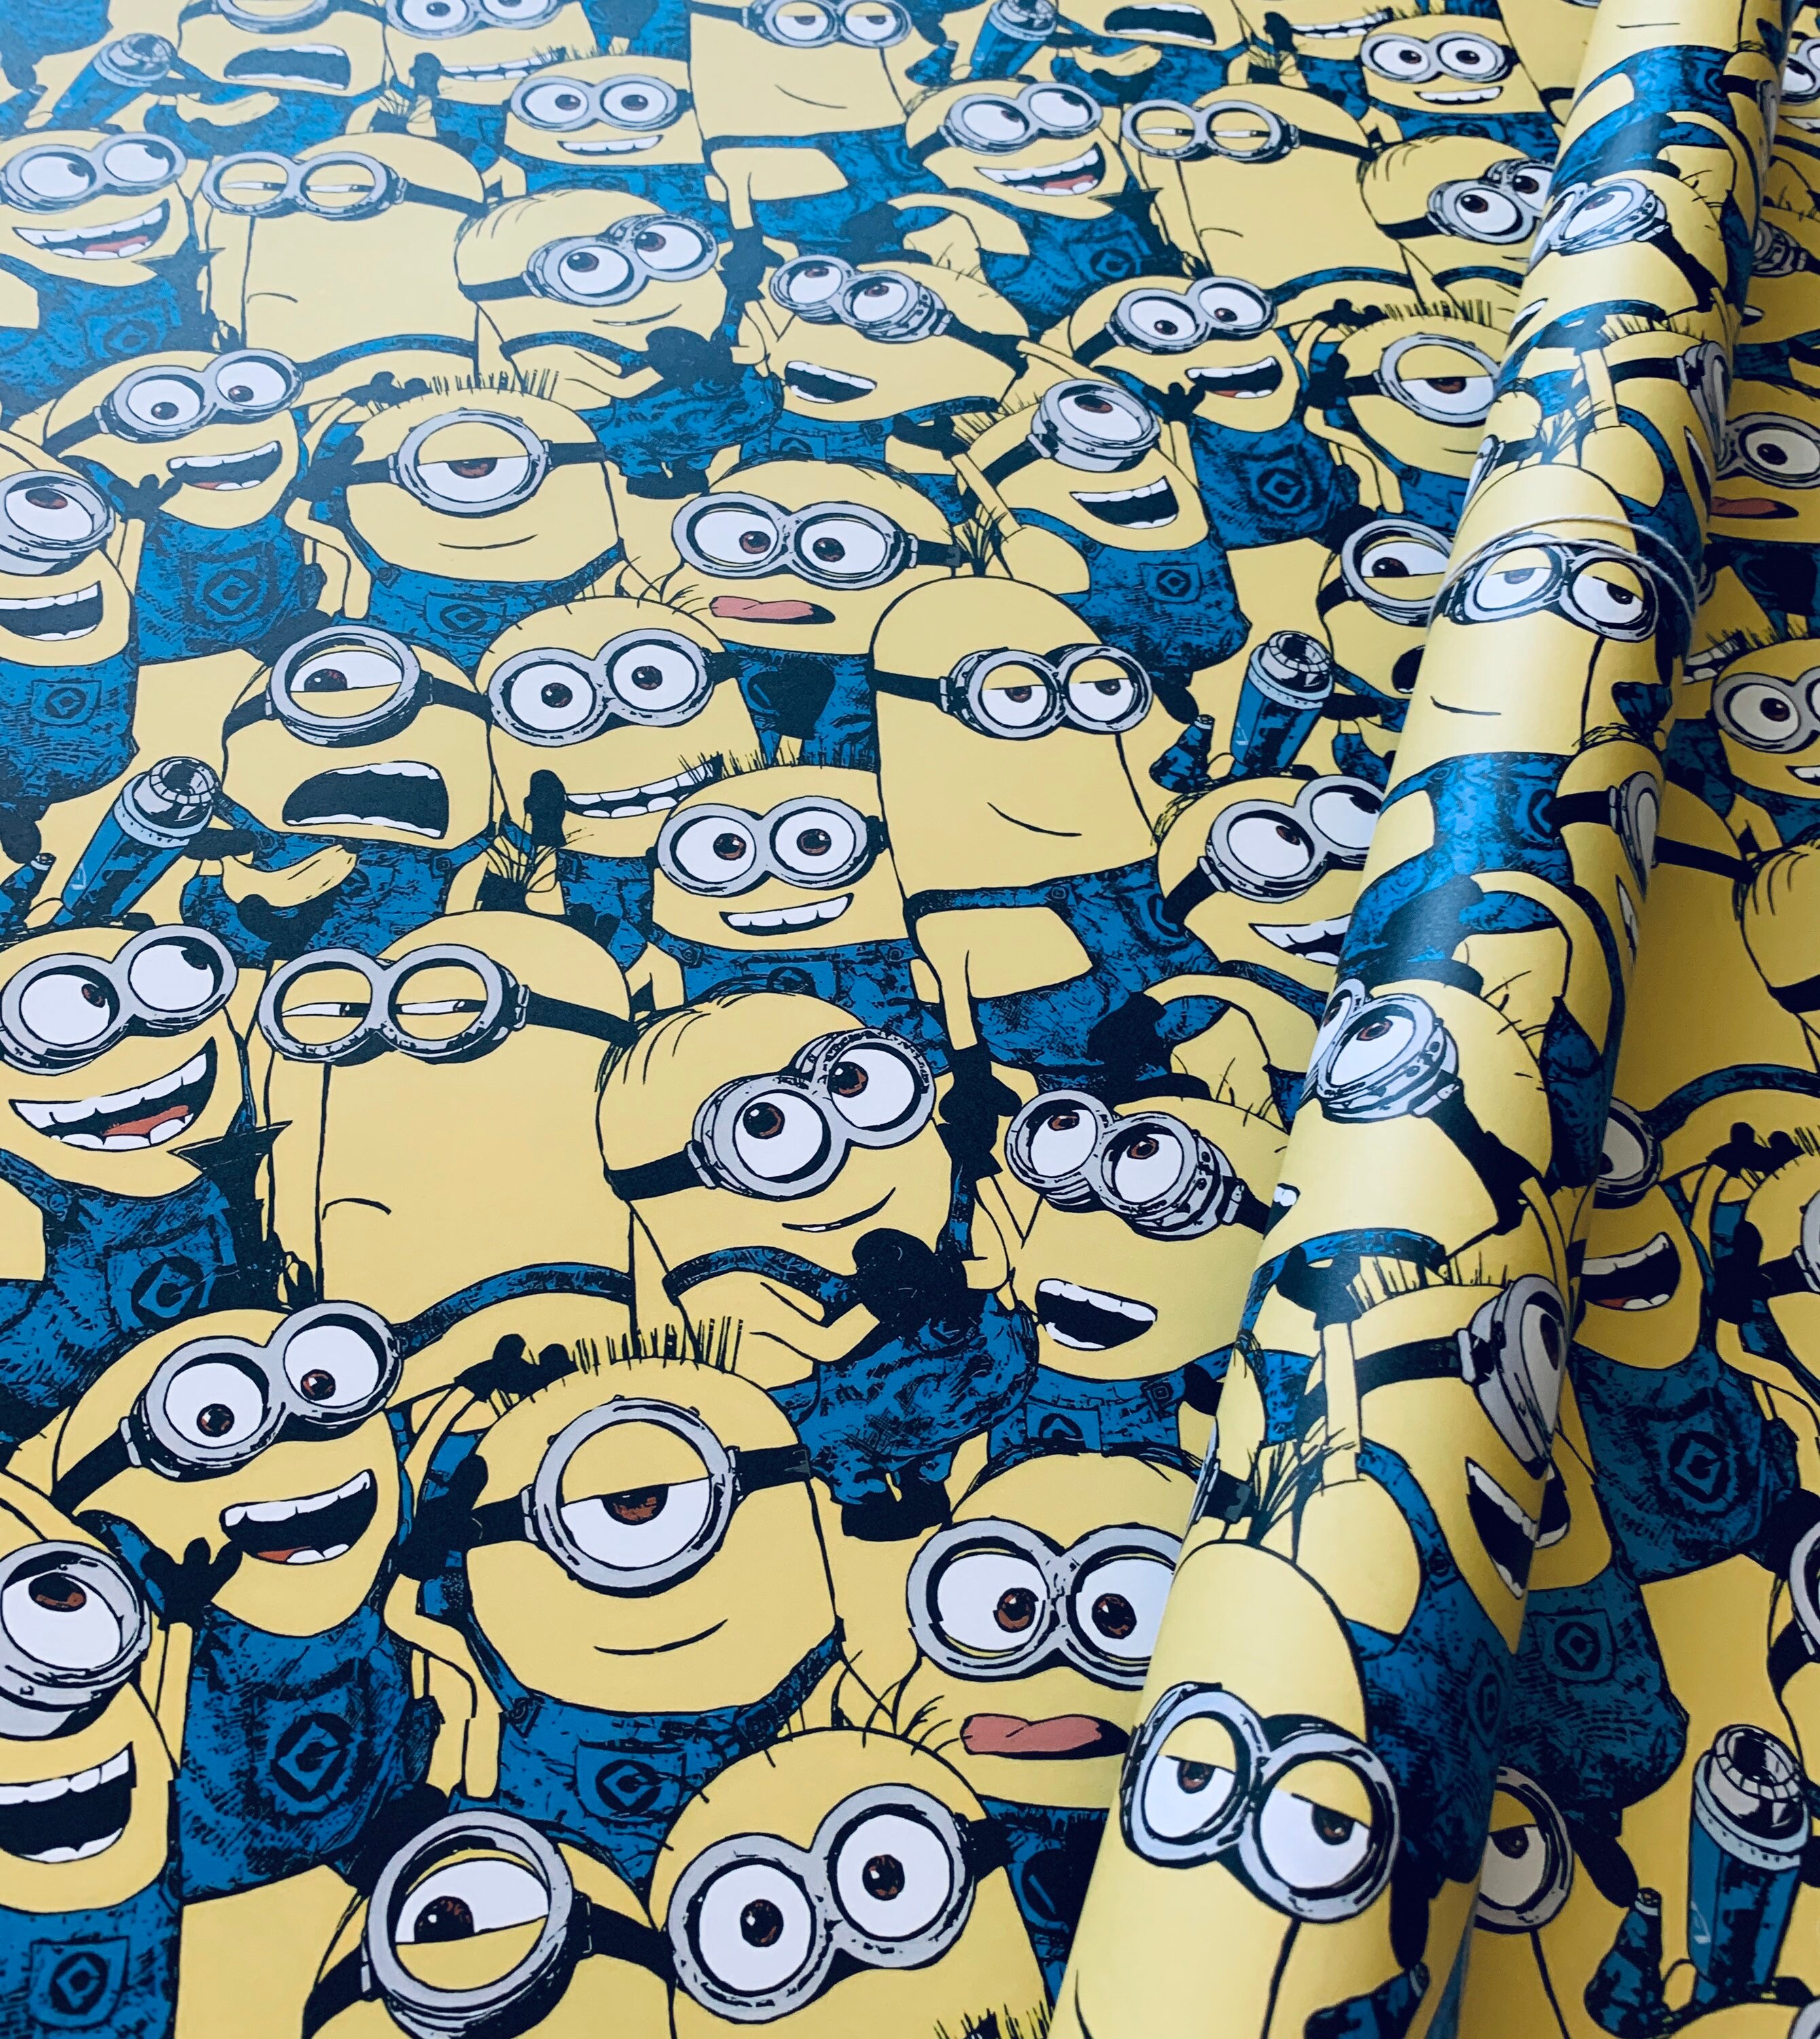 Minions Wrapping Paper